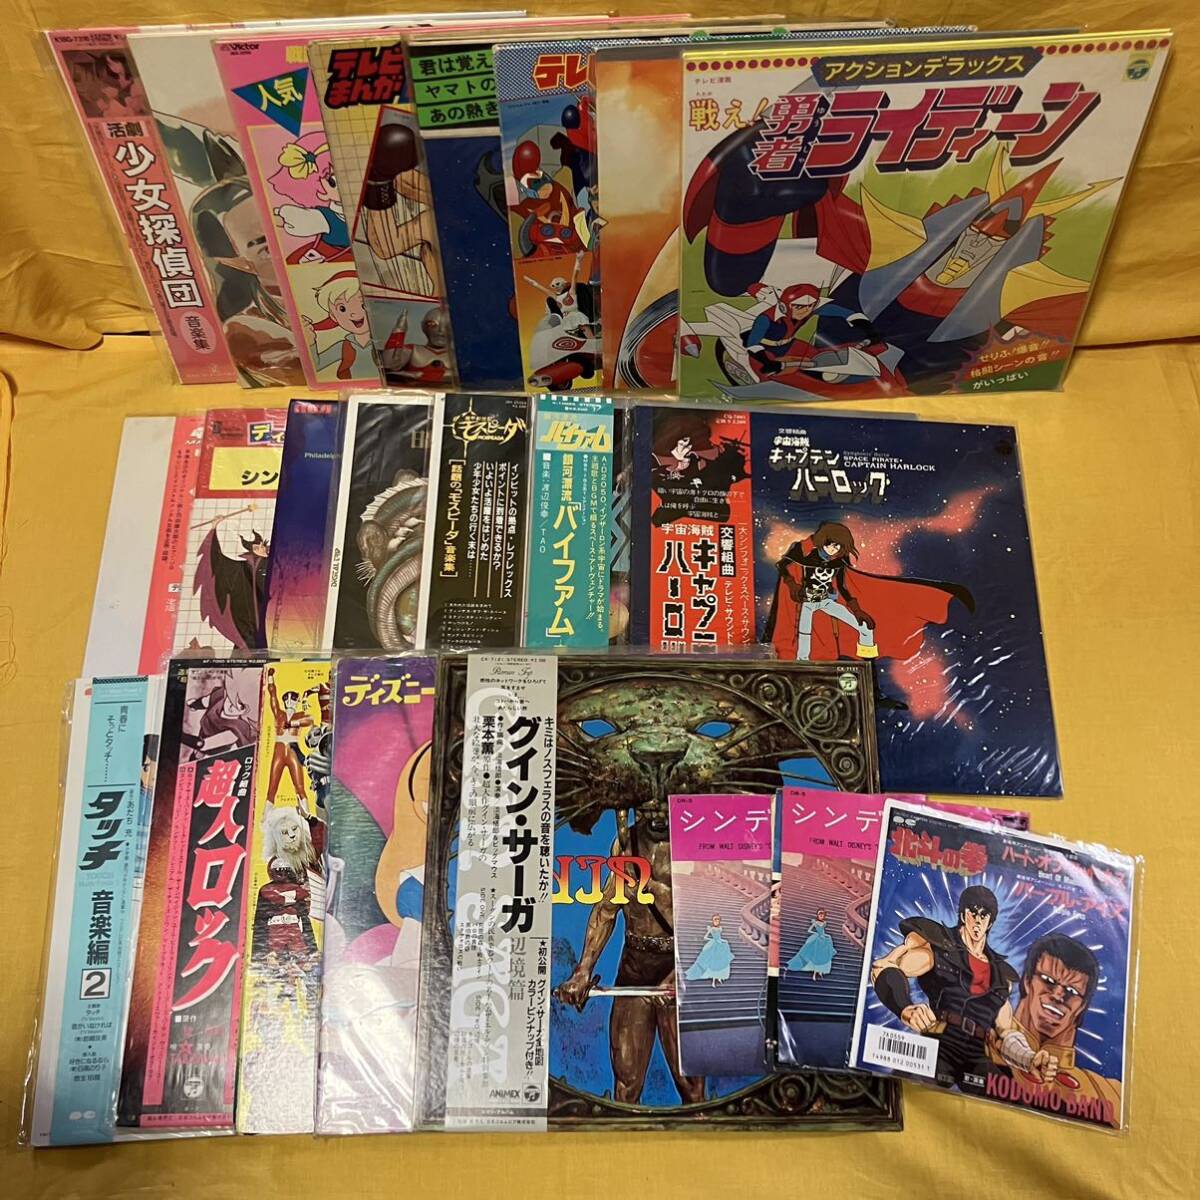 05H-M44 obi attaching contains anime manga LP 20 sheets + single 3 sheets set sale Disney Macross Touch Ken, the Great Bear Fist other record together analogue record 